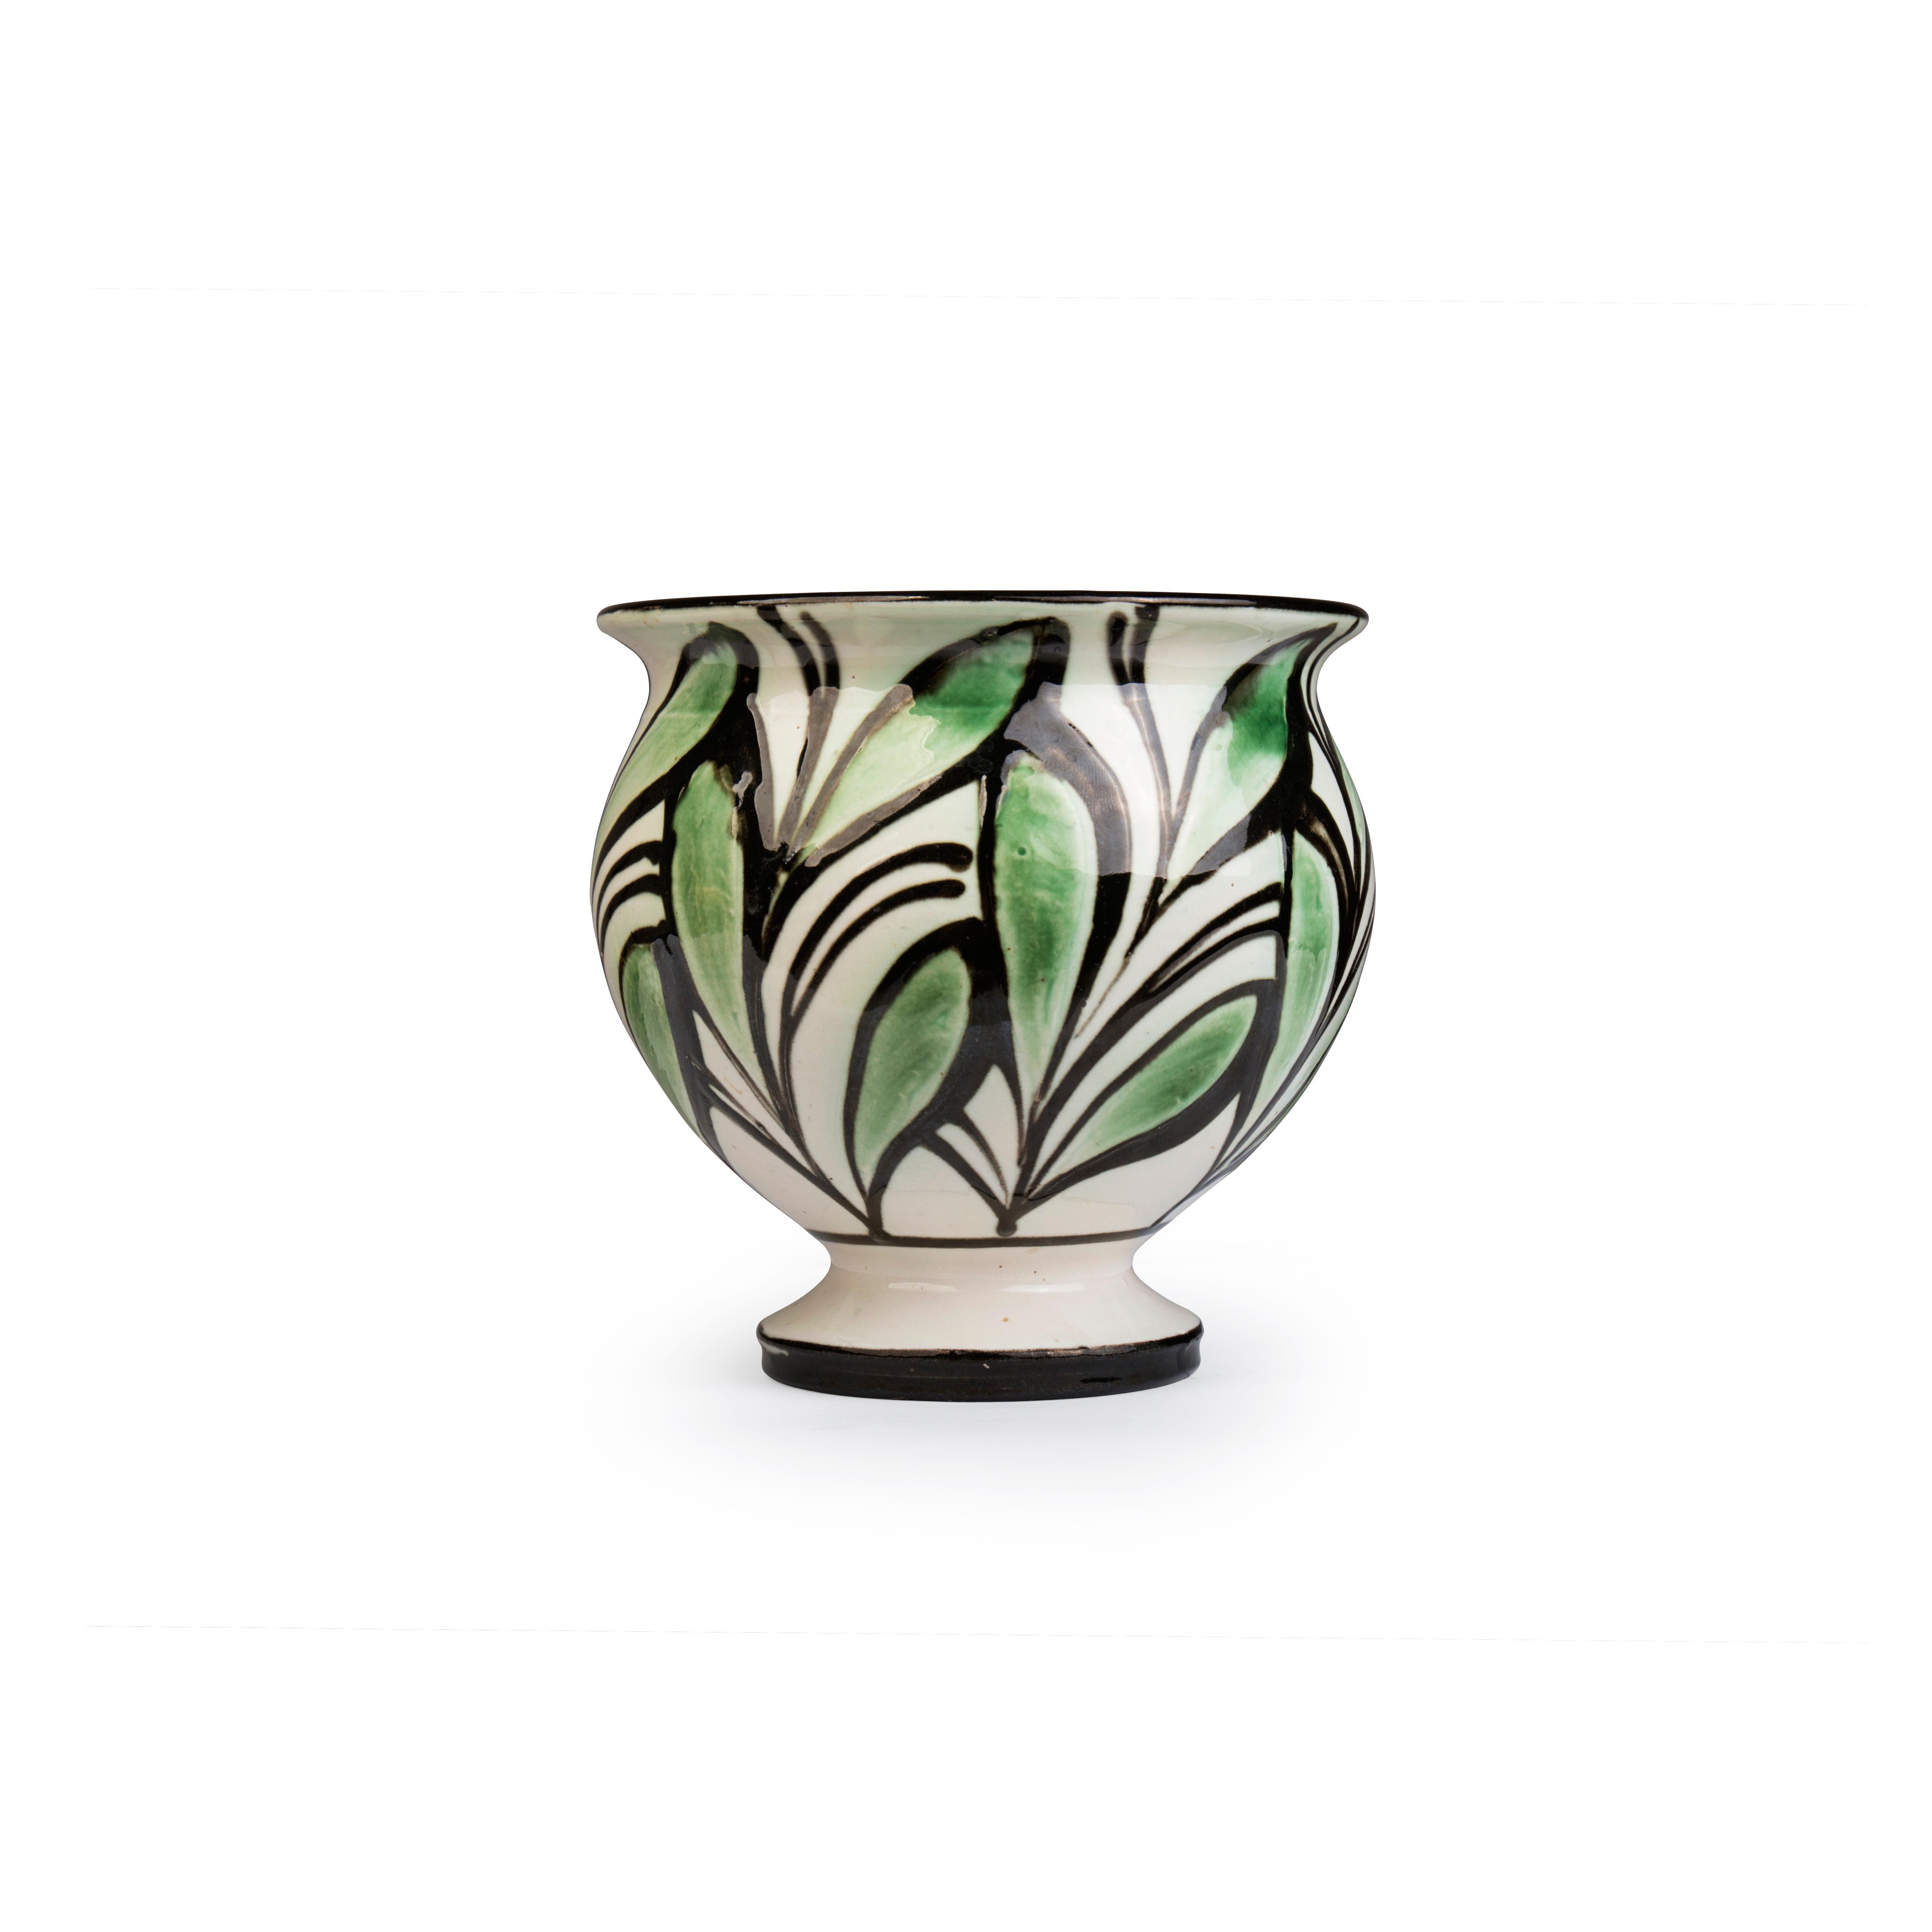 This small earthenware vase by Herman A. Kähler is horn-decorated with green leaves on a white base. Executed by Herman A. Kähler, Denmark, ca. in the 1940s

When Herman H. C. Kähler took over the family company in 1917 as the third generation of